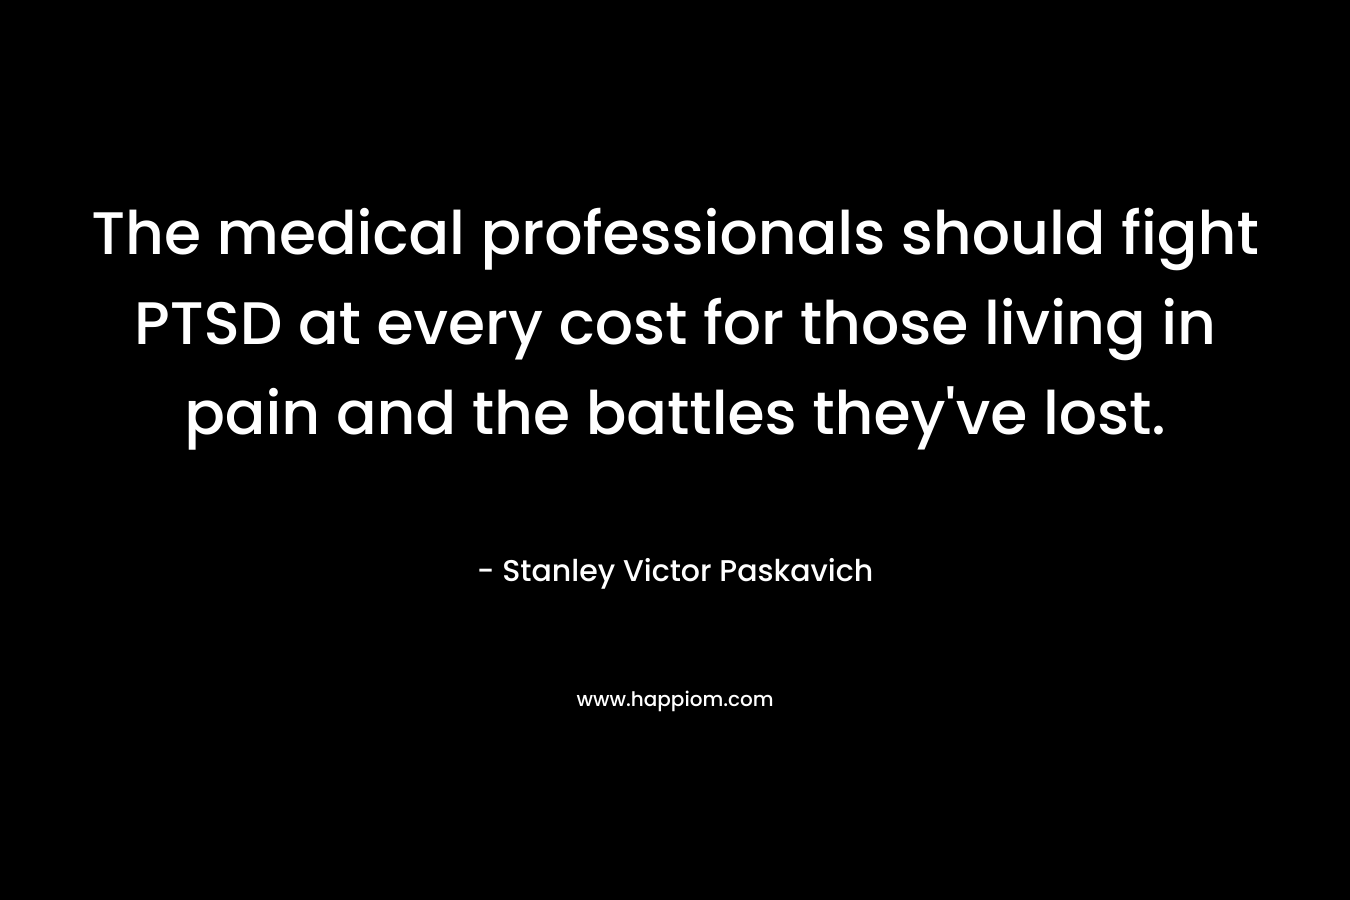 The medical professionals should fight PTSD at every cost for those living in pain and the battles they've lost.